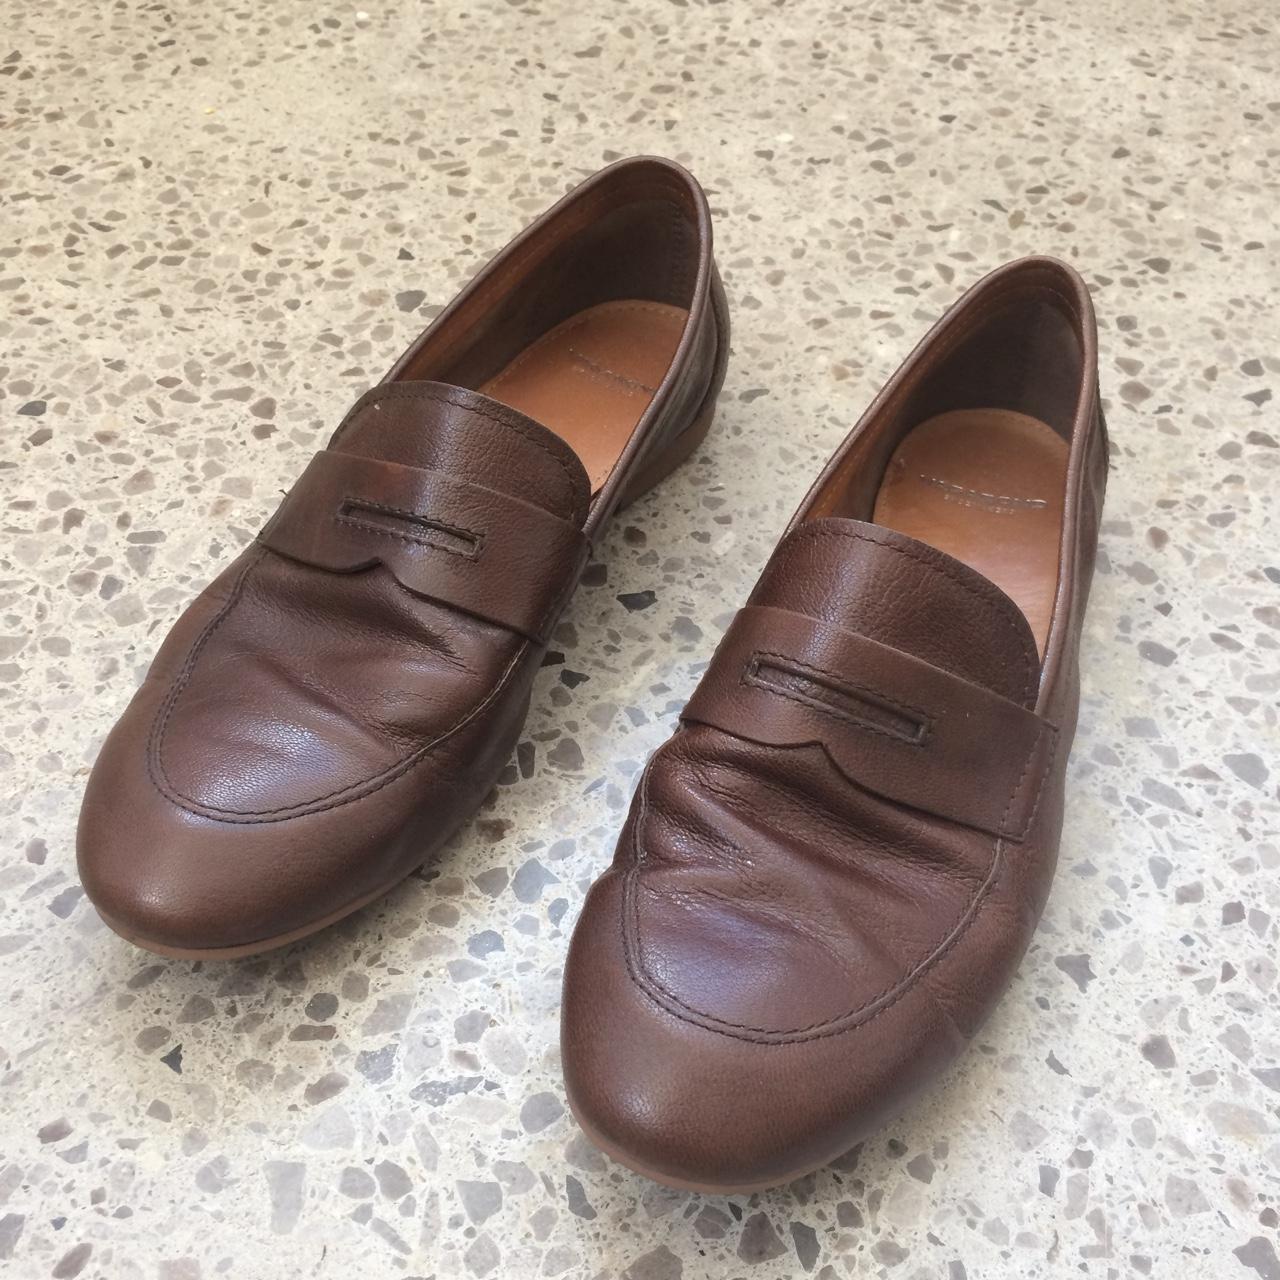 Clara loafers Perfect condition - too... -